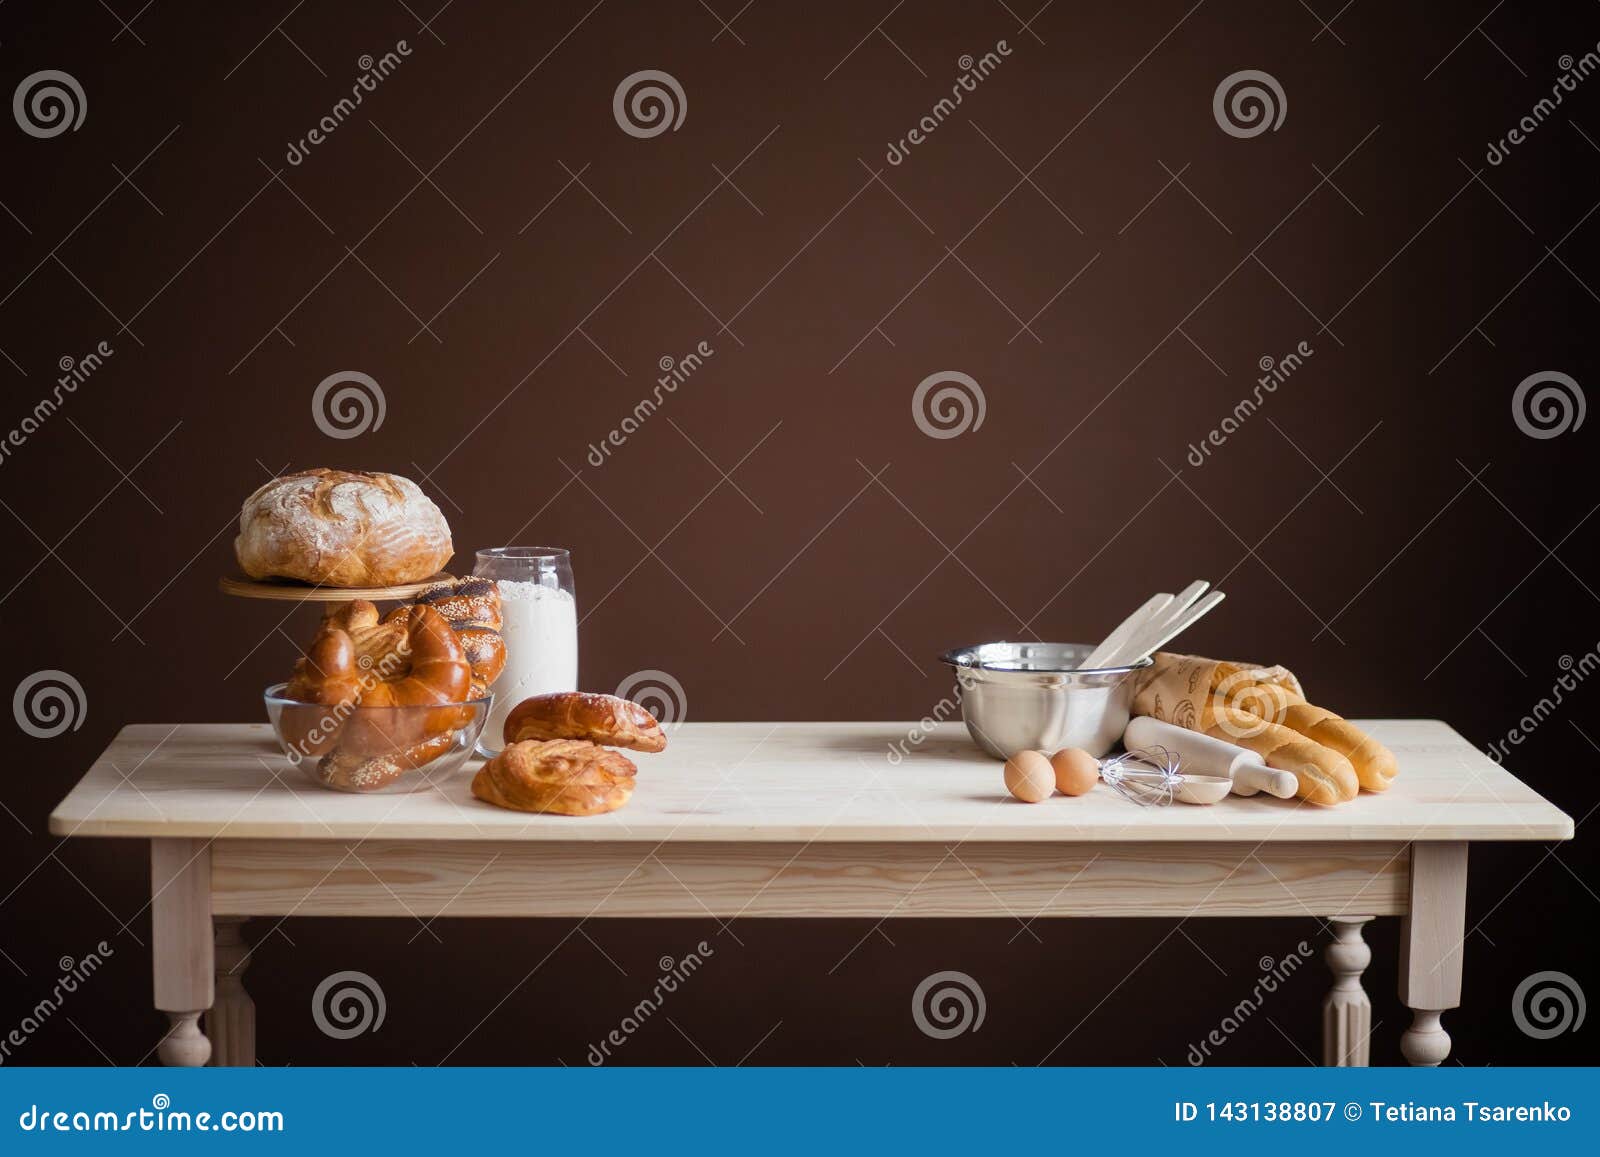 wooden table on a brown background with baked goods, bread, buns